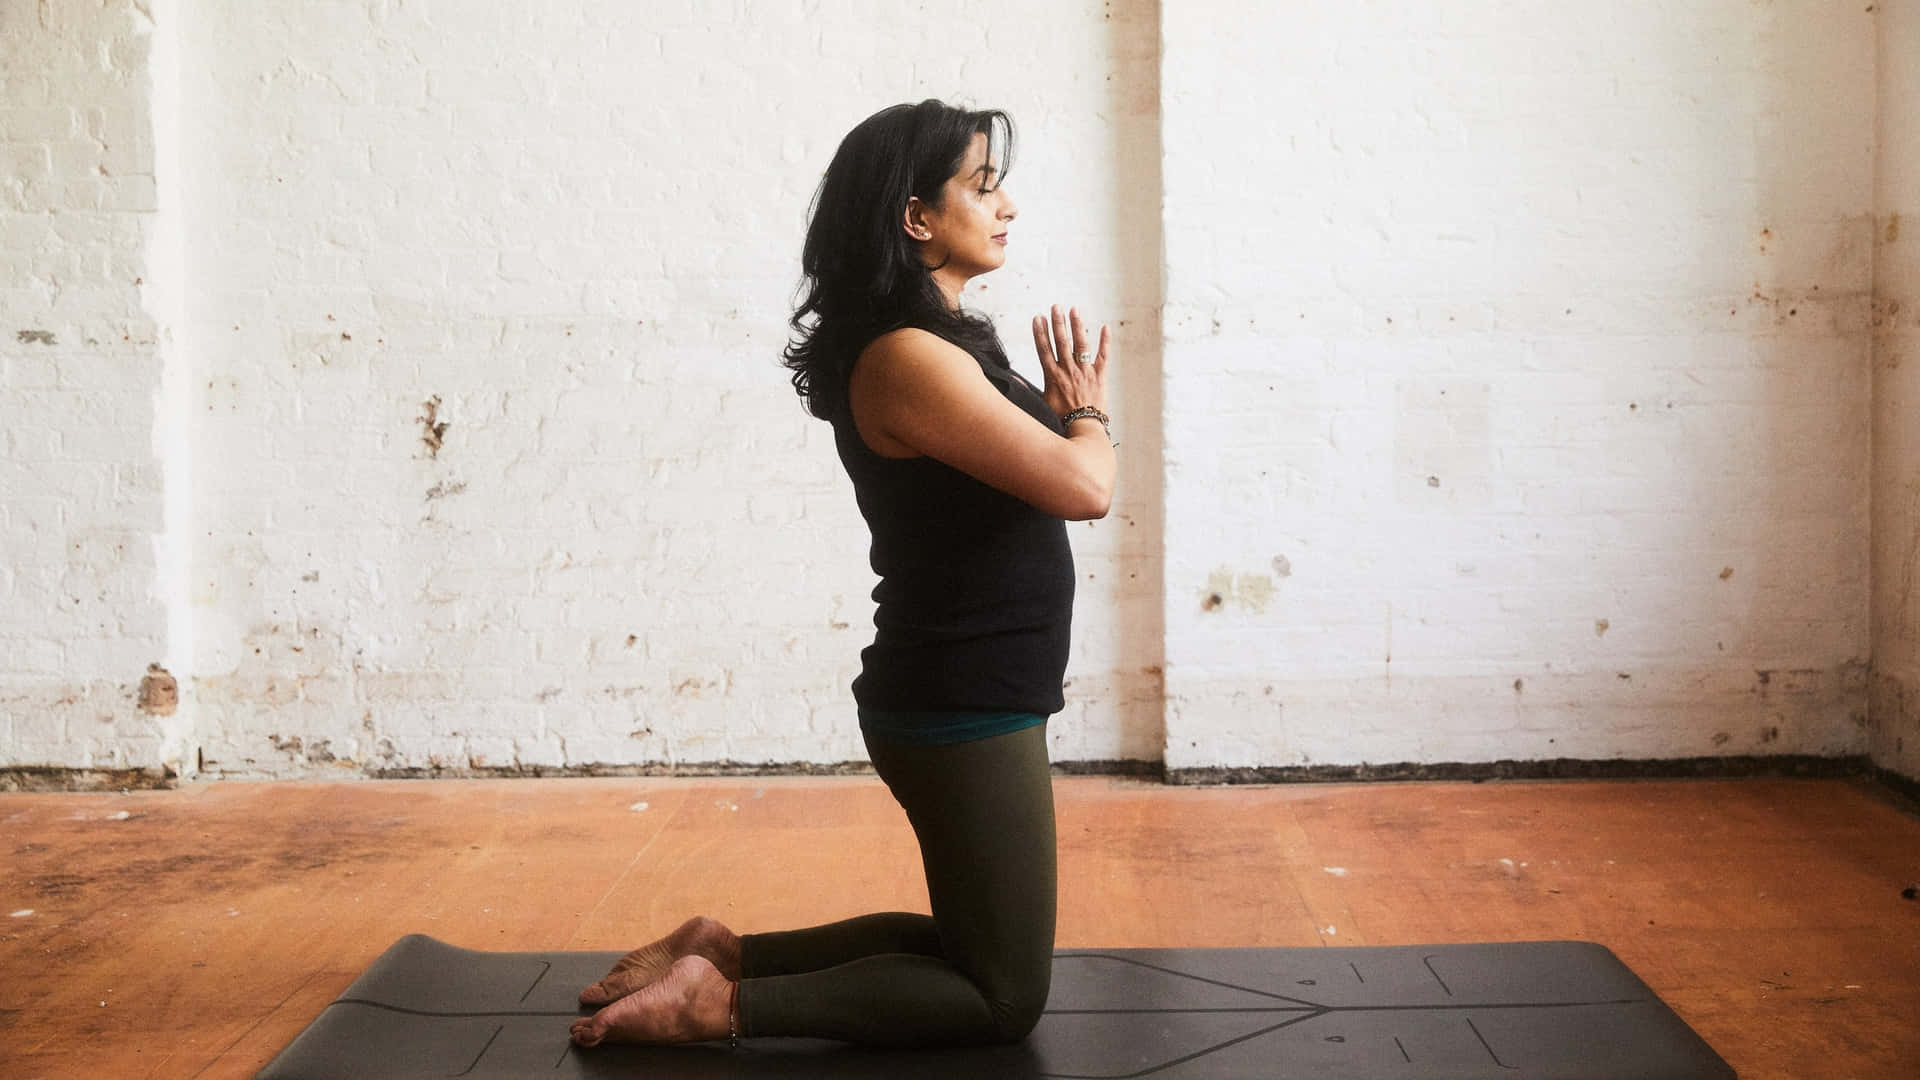 Find inner harmony and balance with Yoga